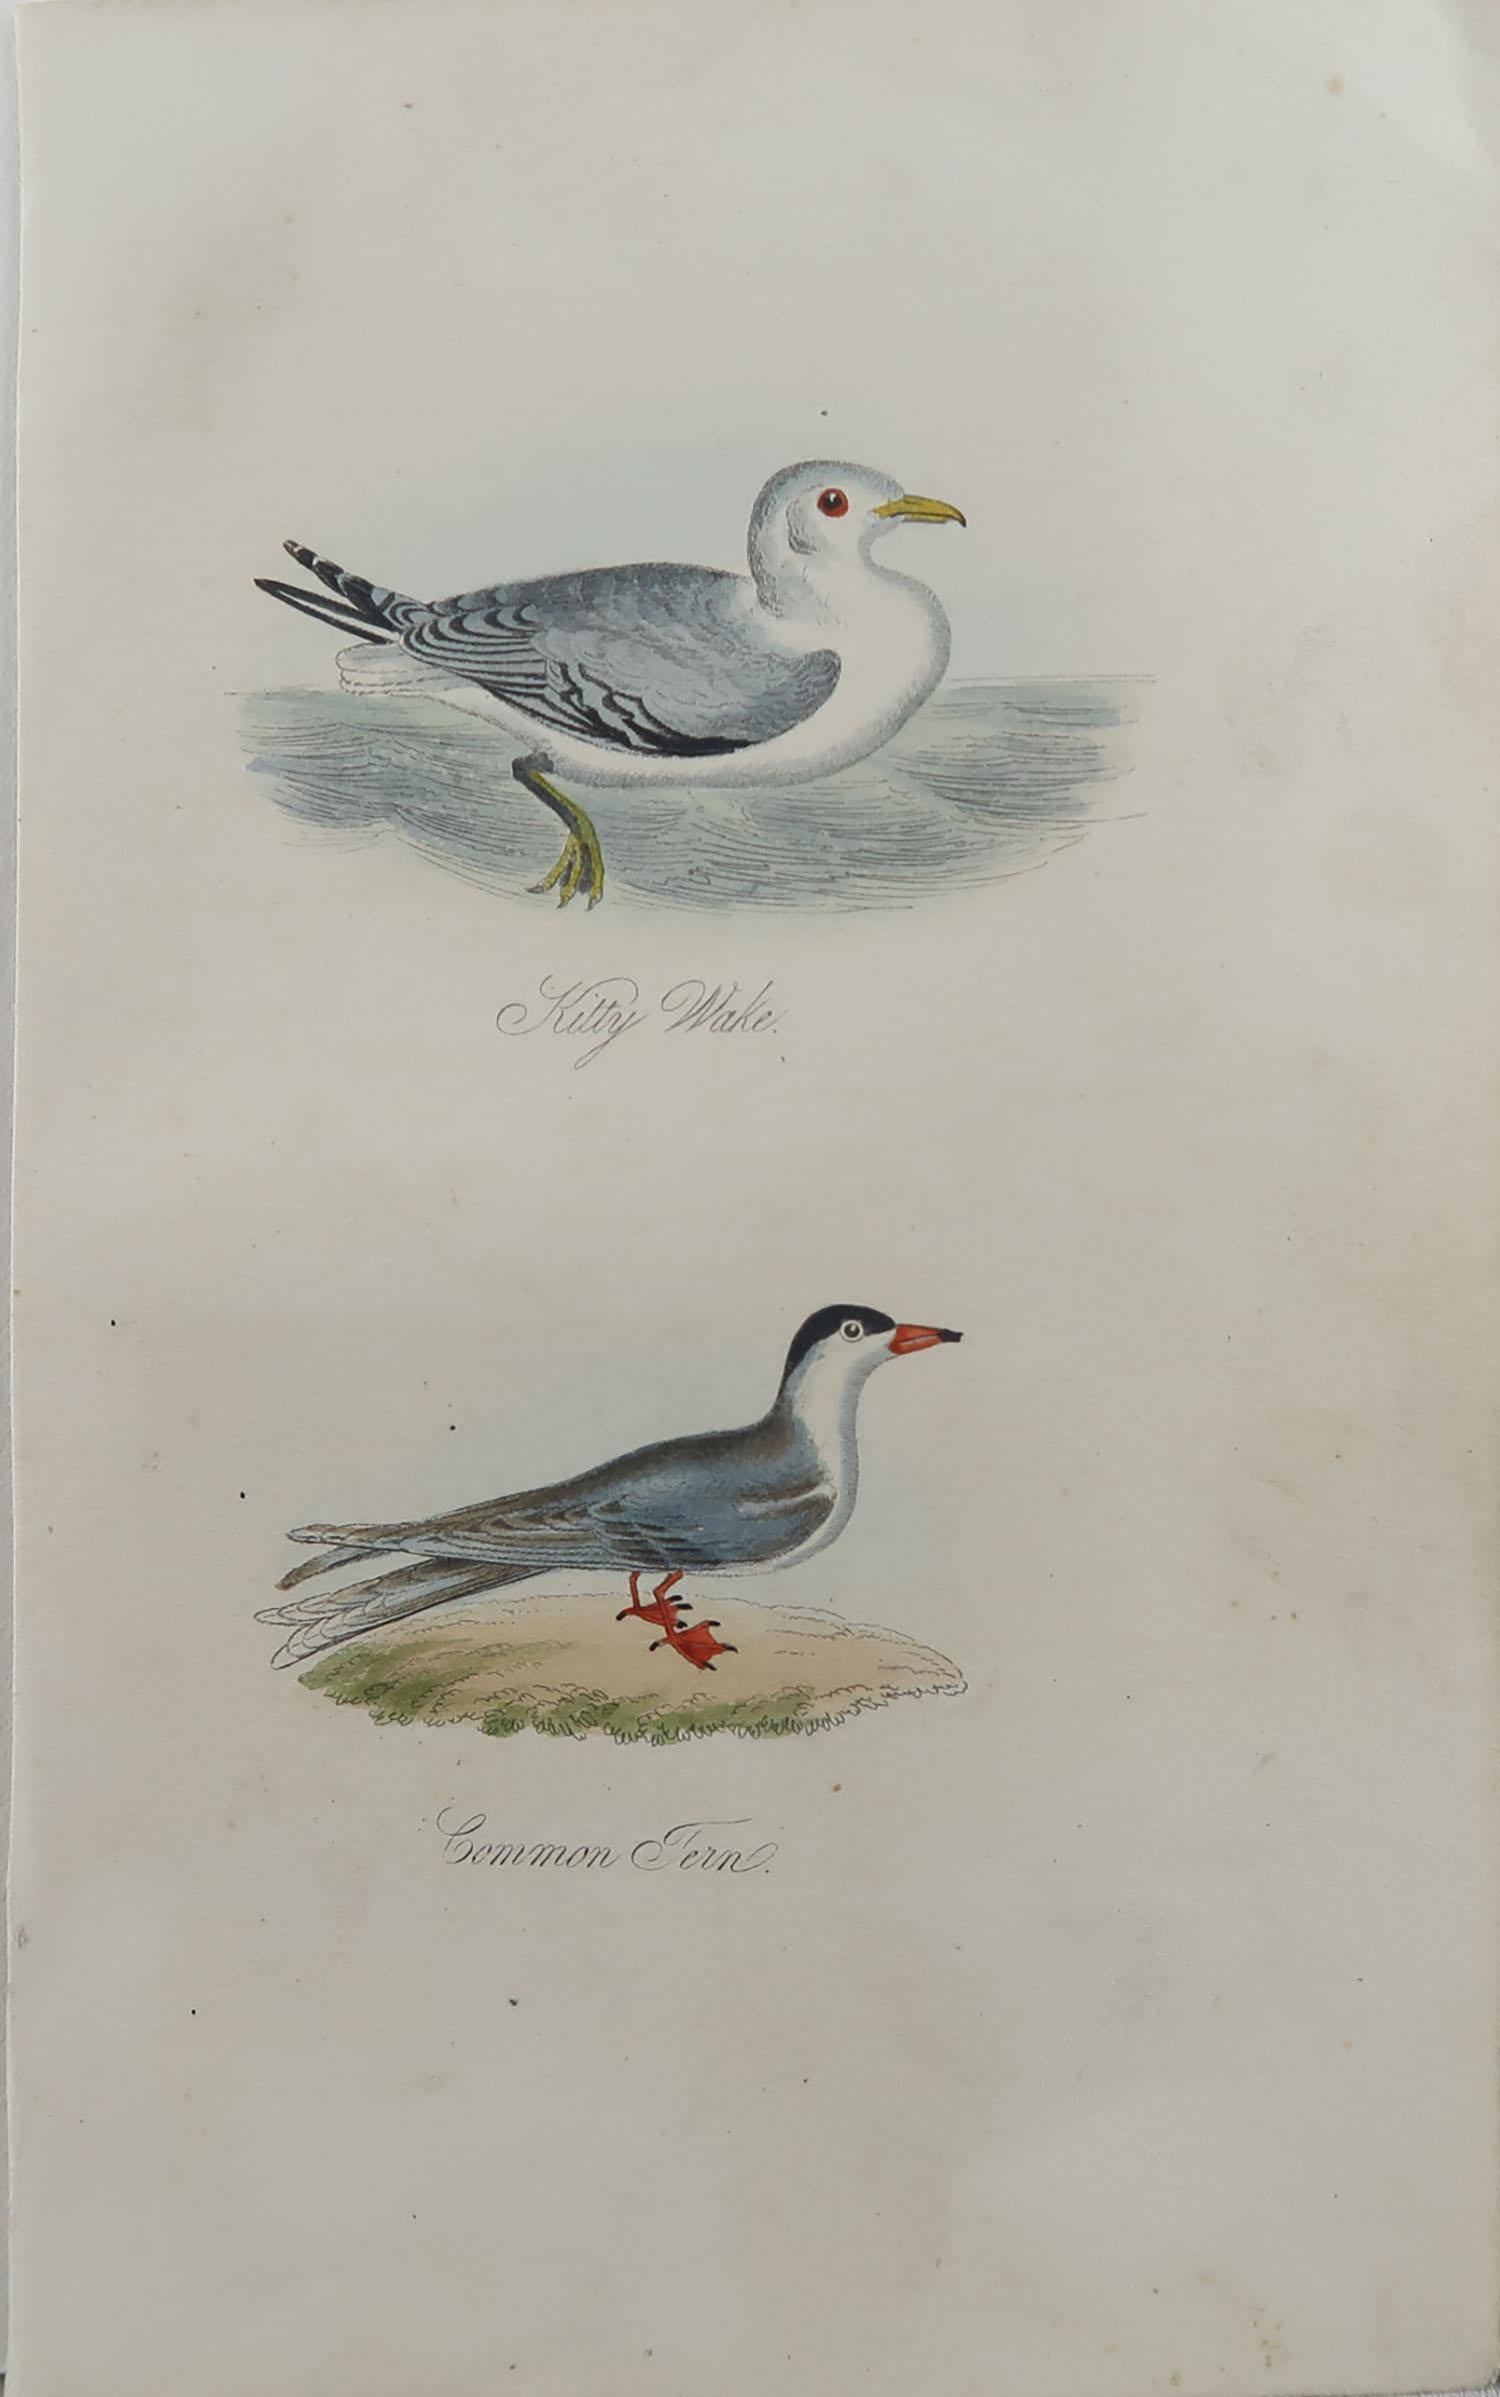 Great image of a kittiwake and a common tern

Unframed. It gives you the option of perhaps making a set up using your own choice of frames.

Lithograph heightened with gum Arabic.

Original color

Published, circa 1850

Free